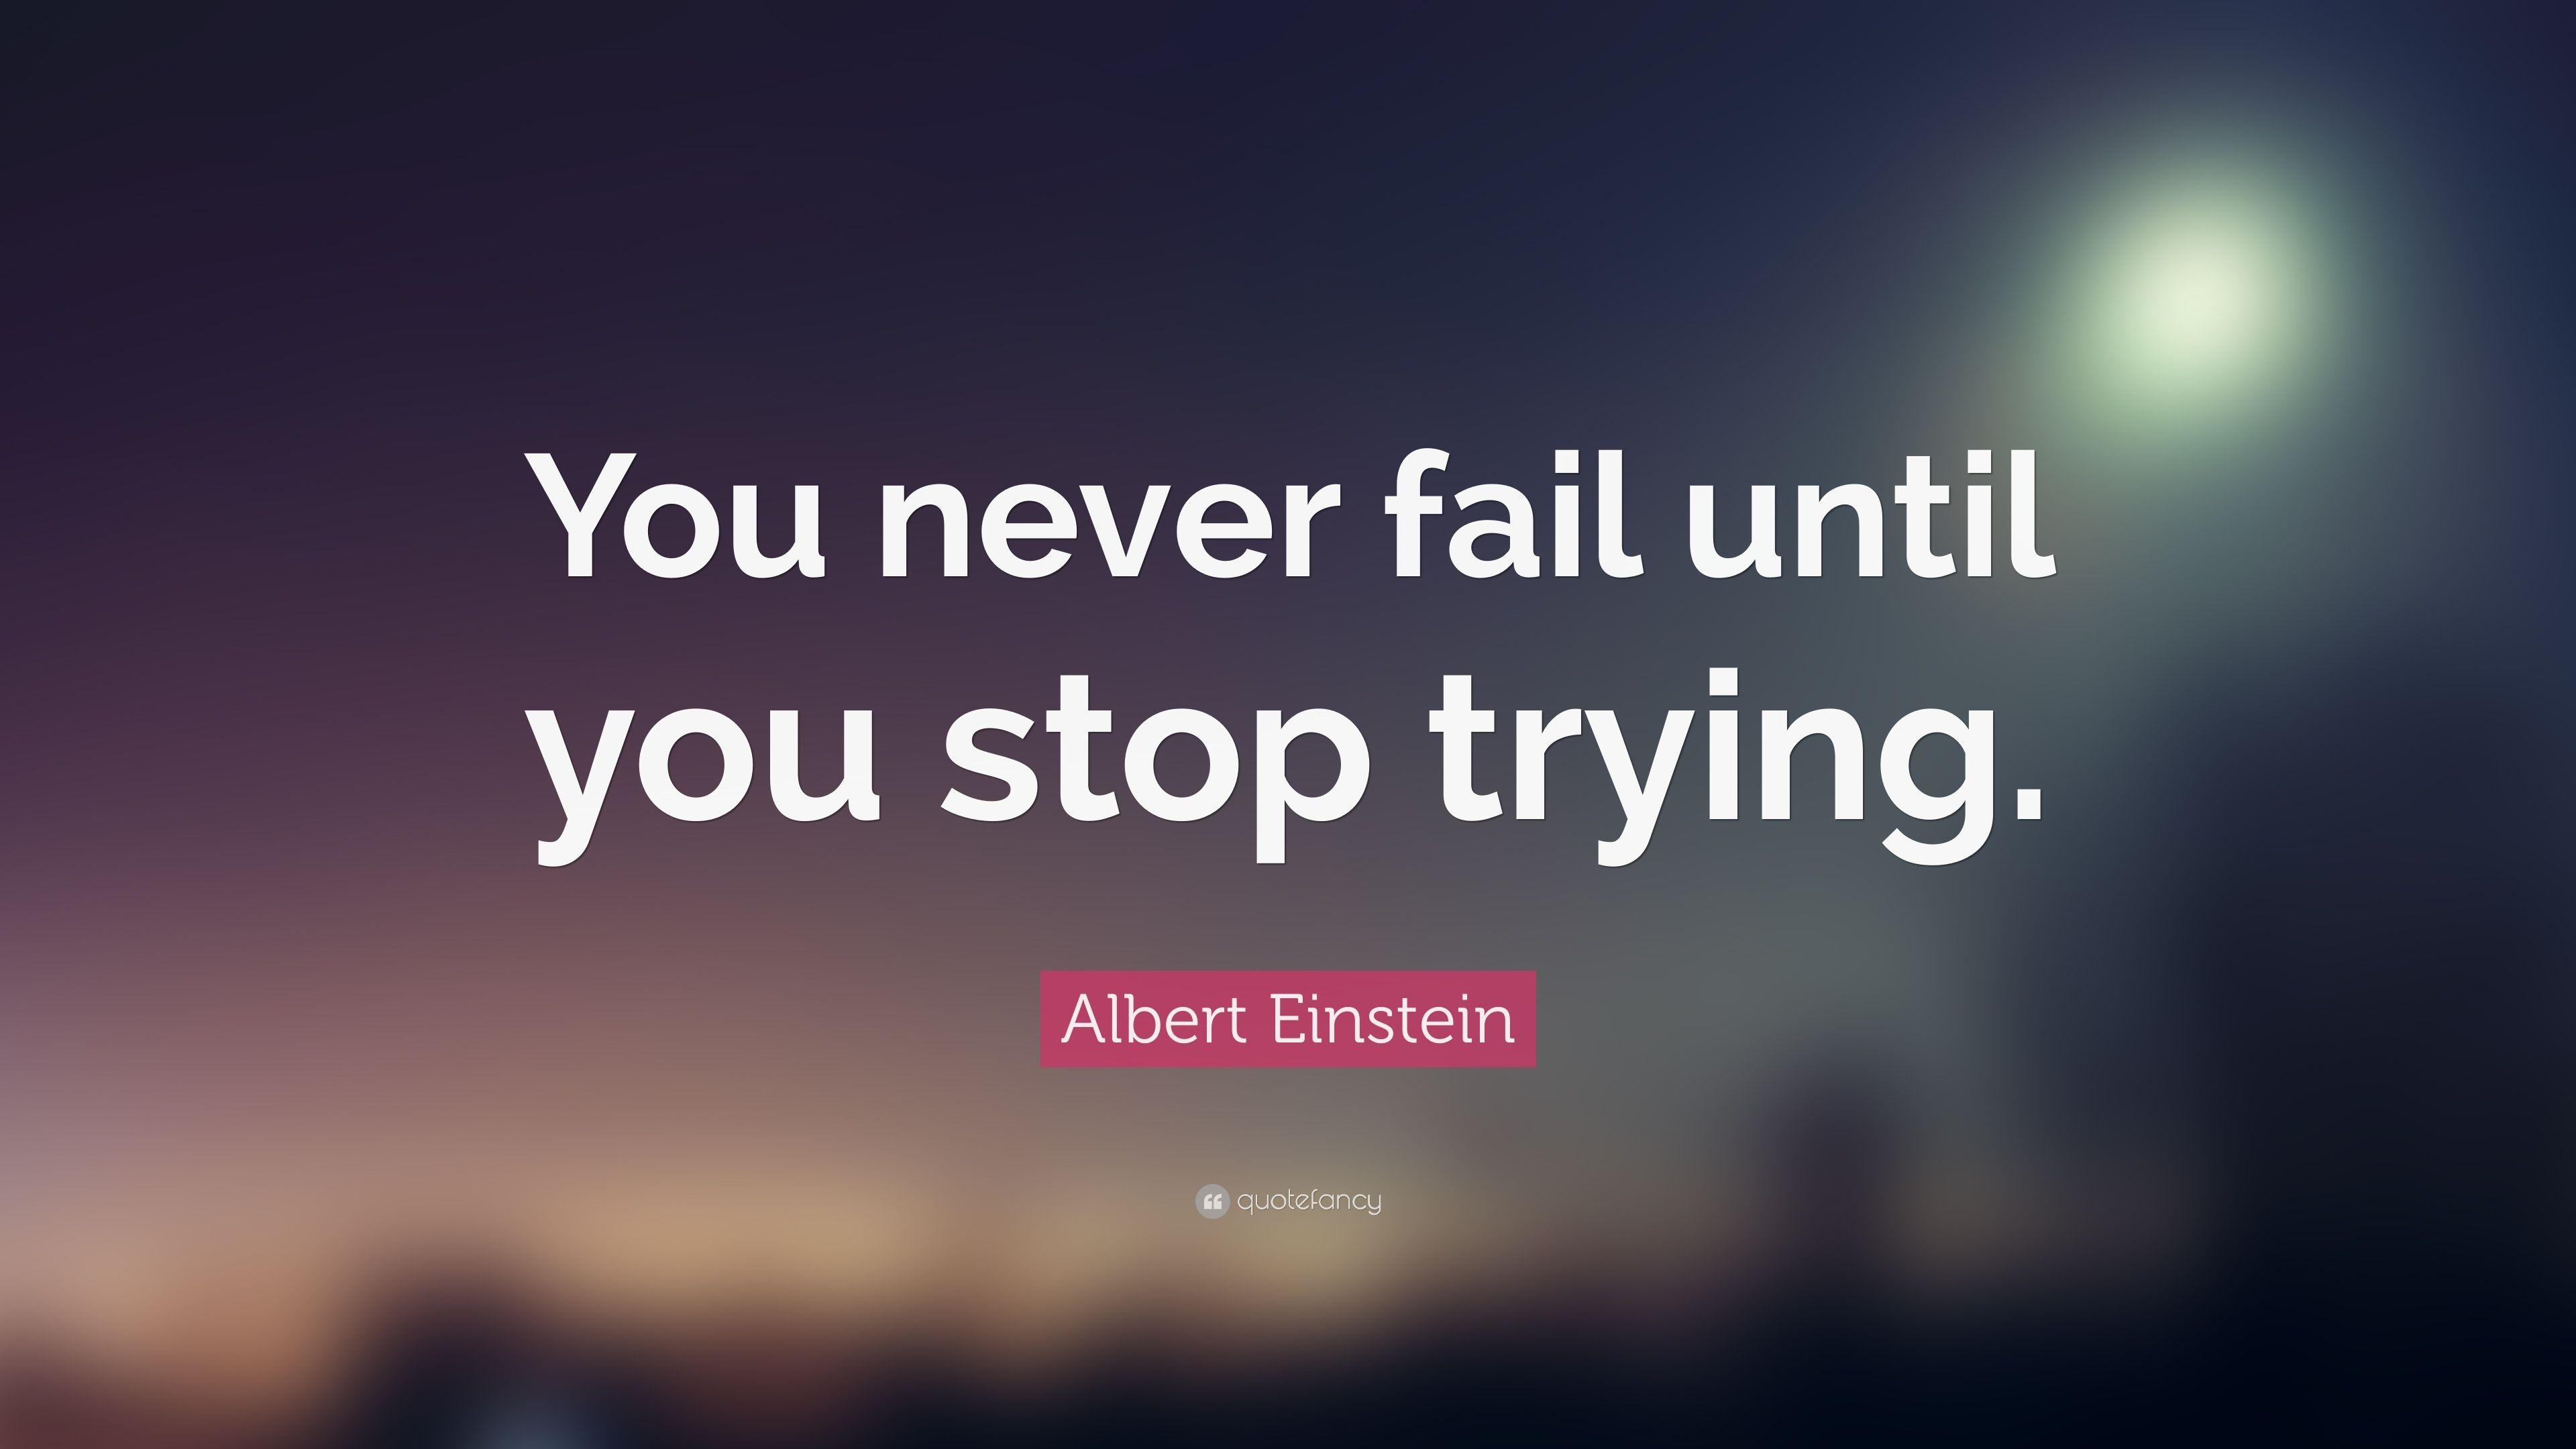 Albert Einstein Quote: “You never fail until you stop trying.” 29